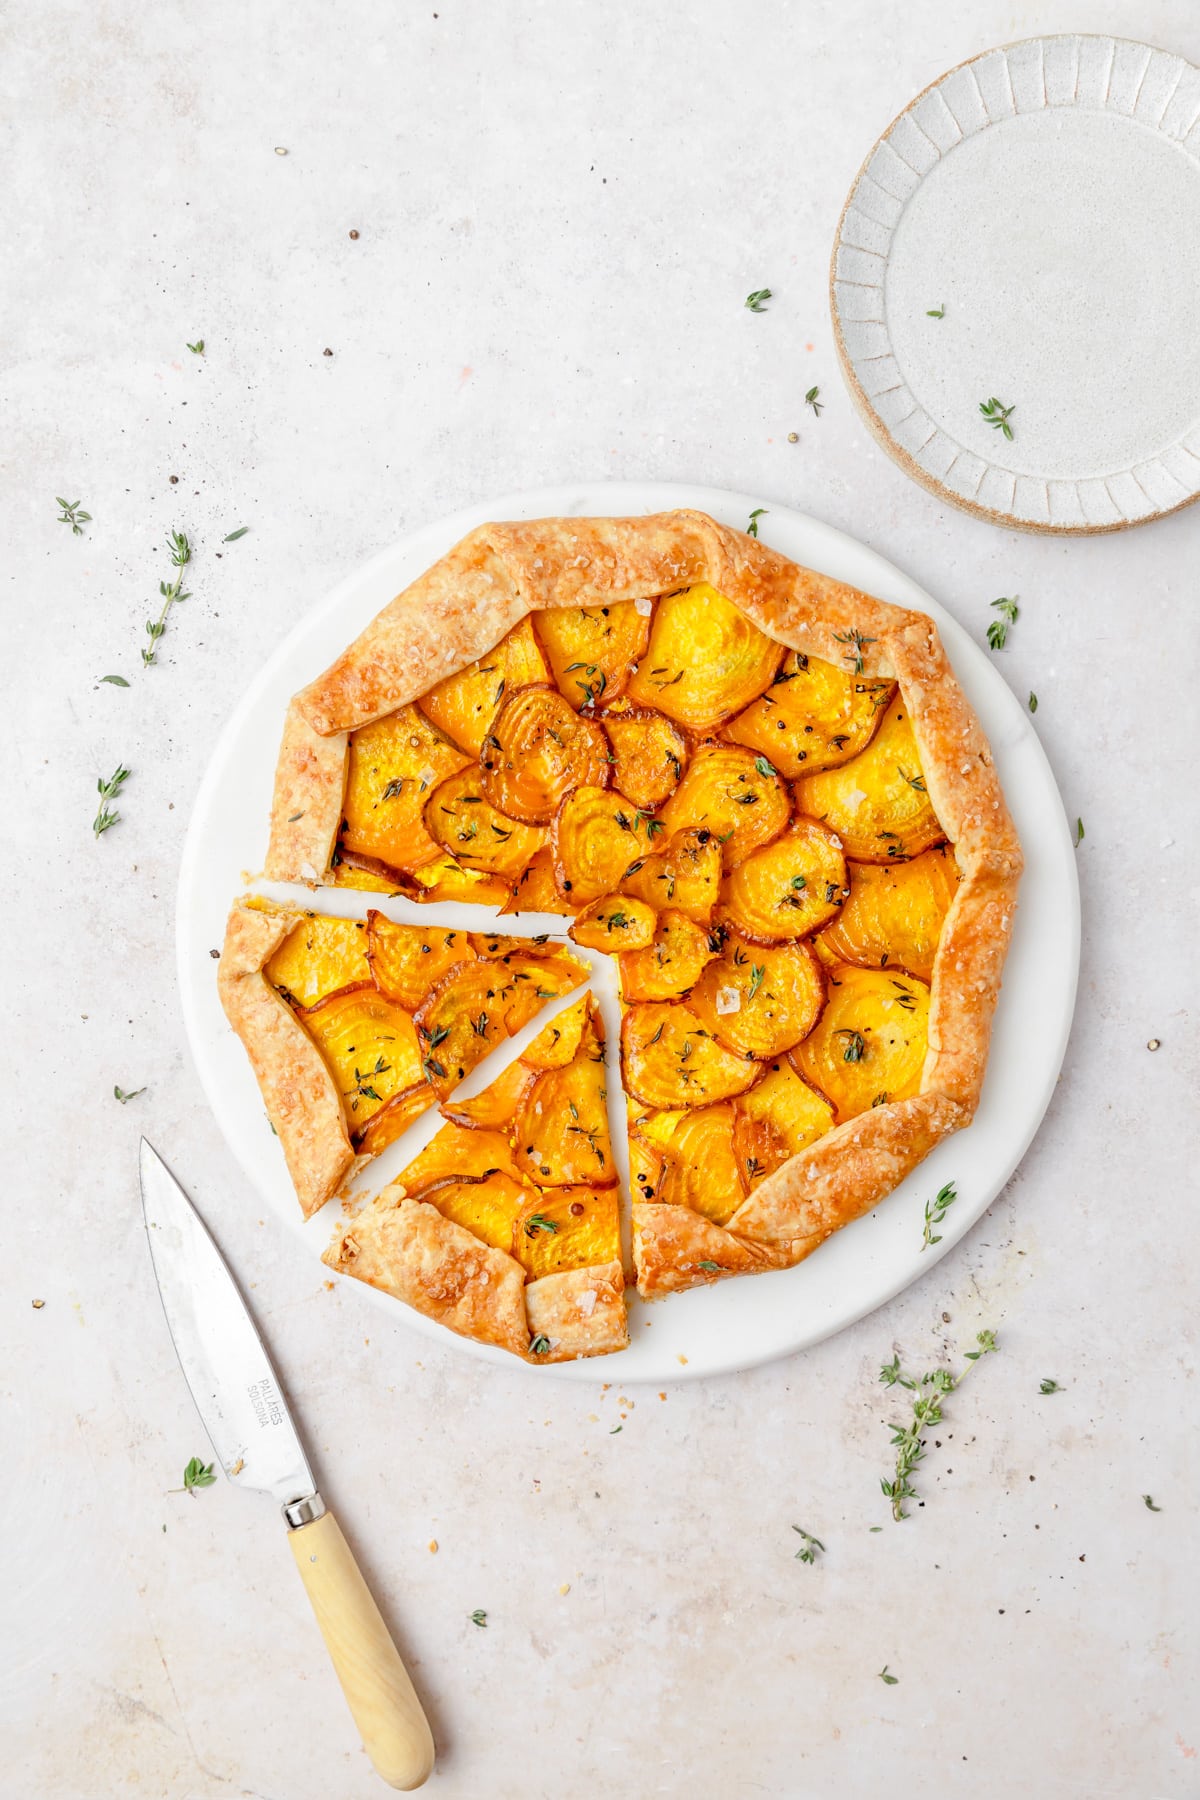 golden beet galette with parmesan pie crust cut into slices.